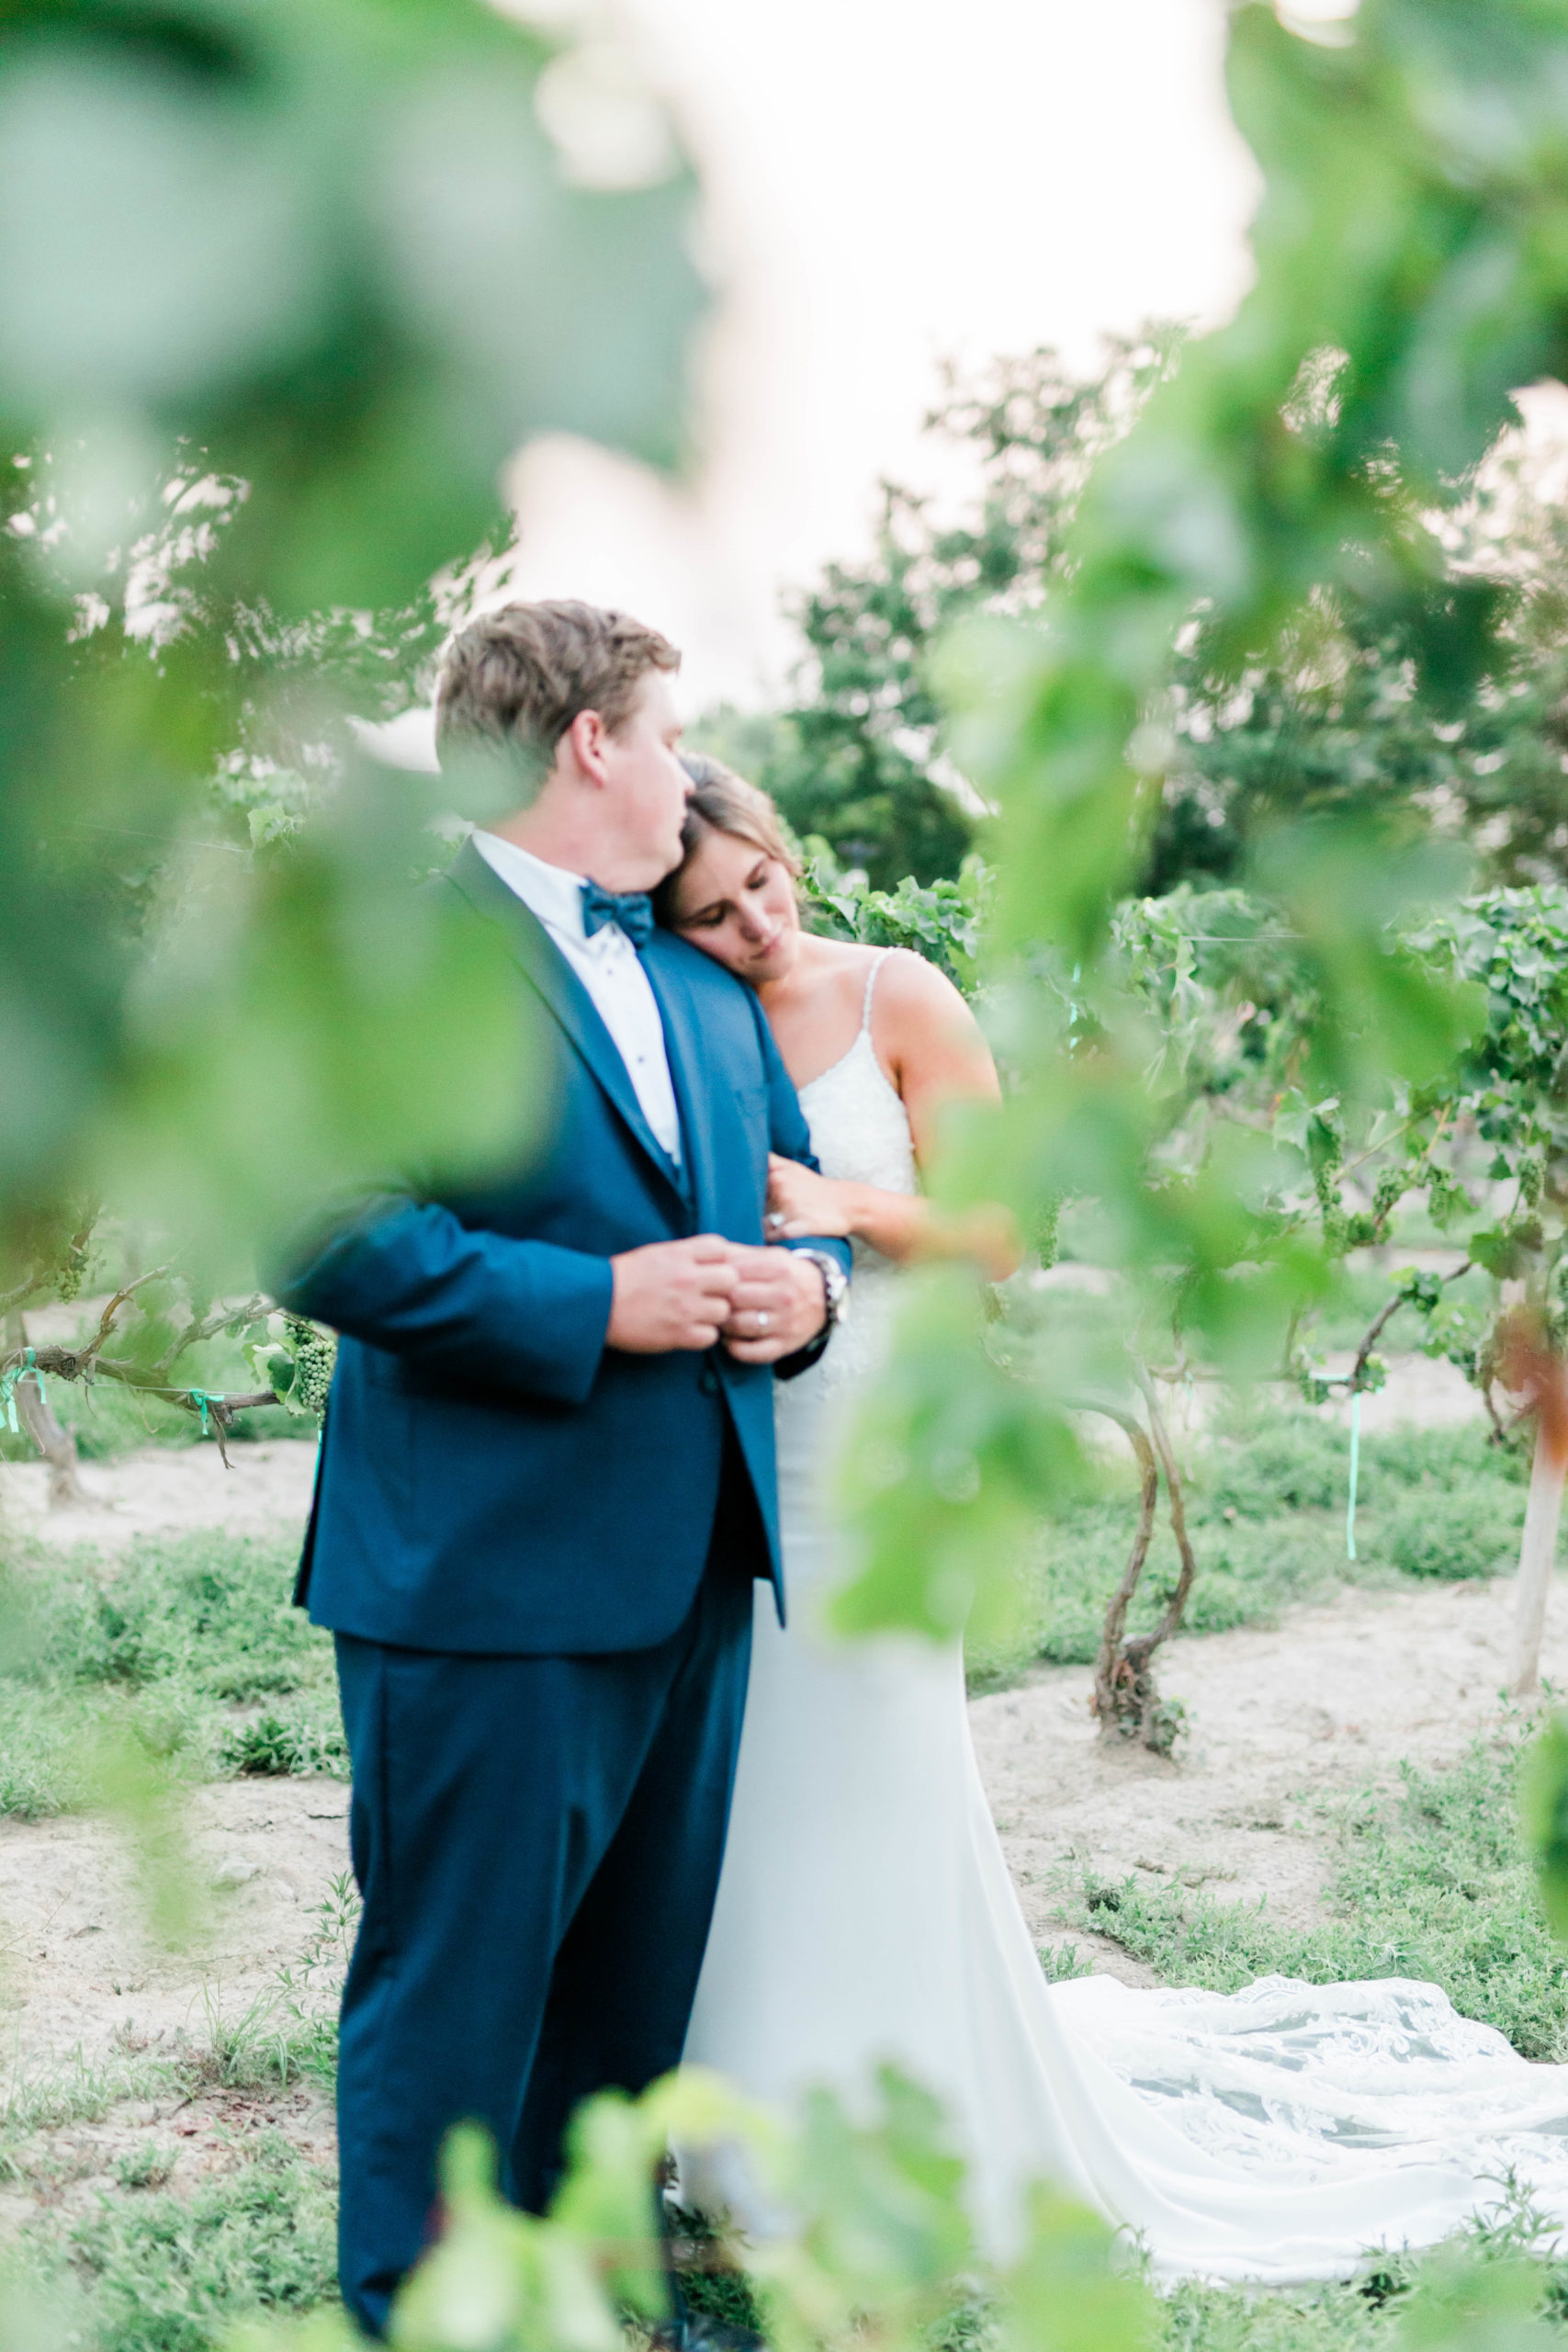 bride and groom embrace in a vineyard for their wedding day